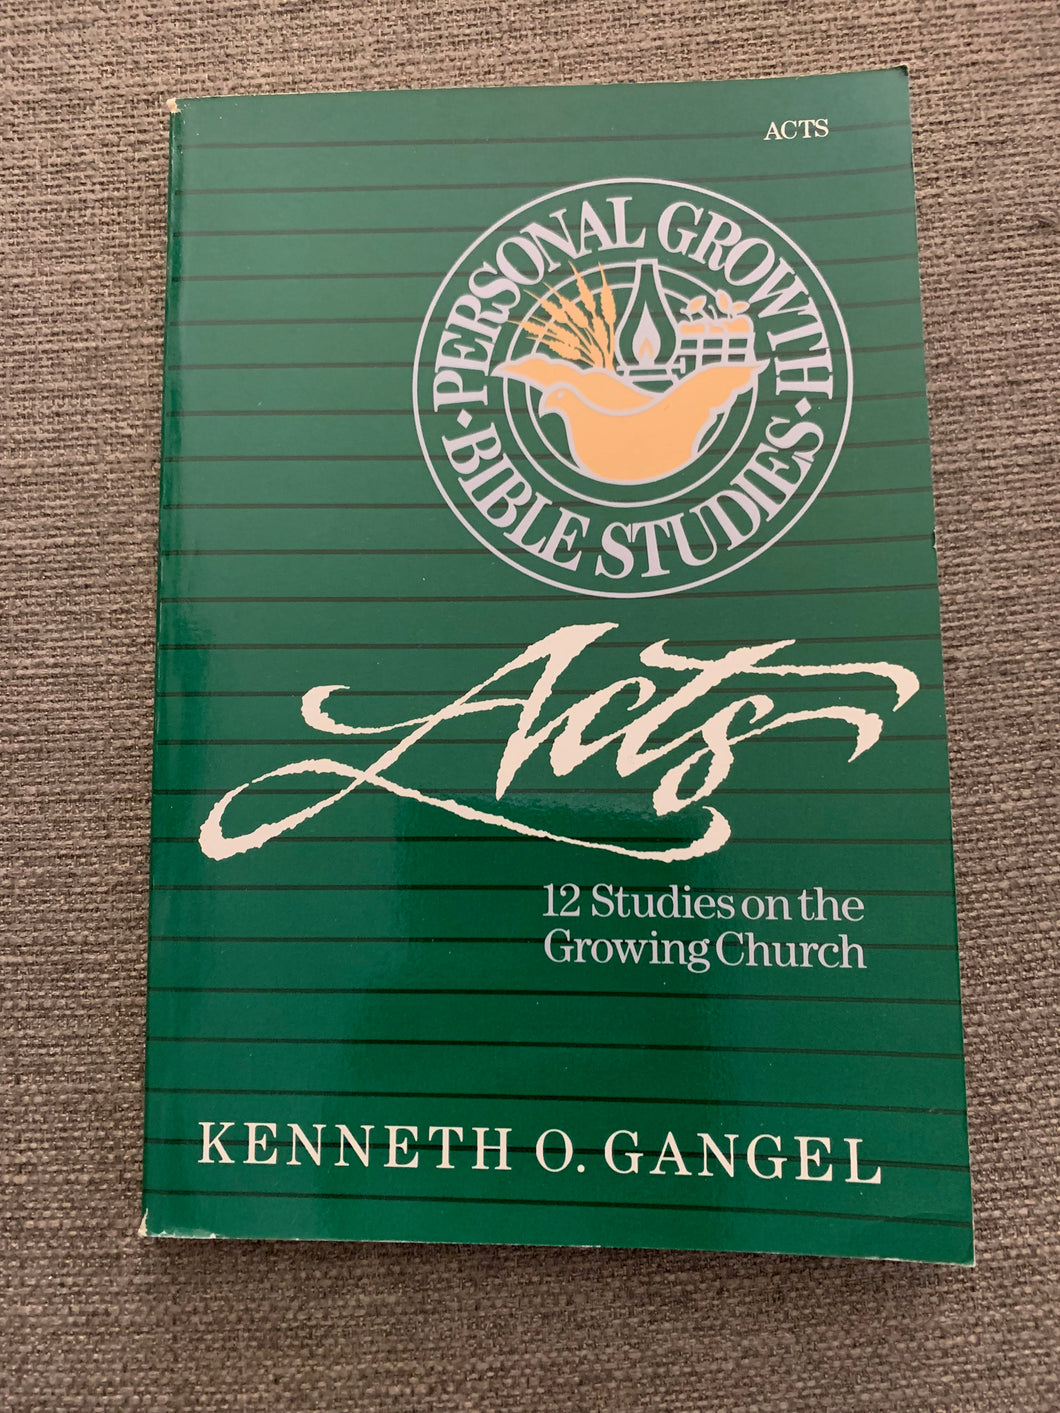 Acts: 12 Studies on the Growing Church by Kenneth O. Gangel